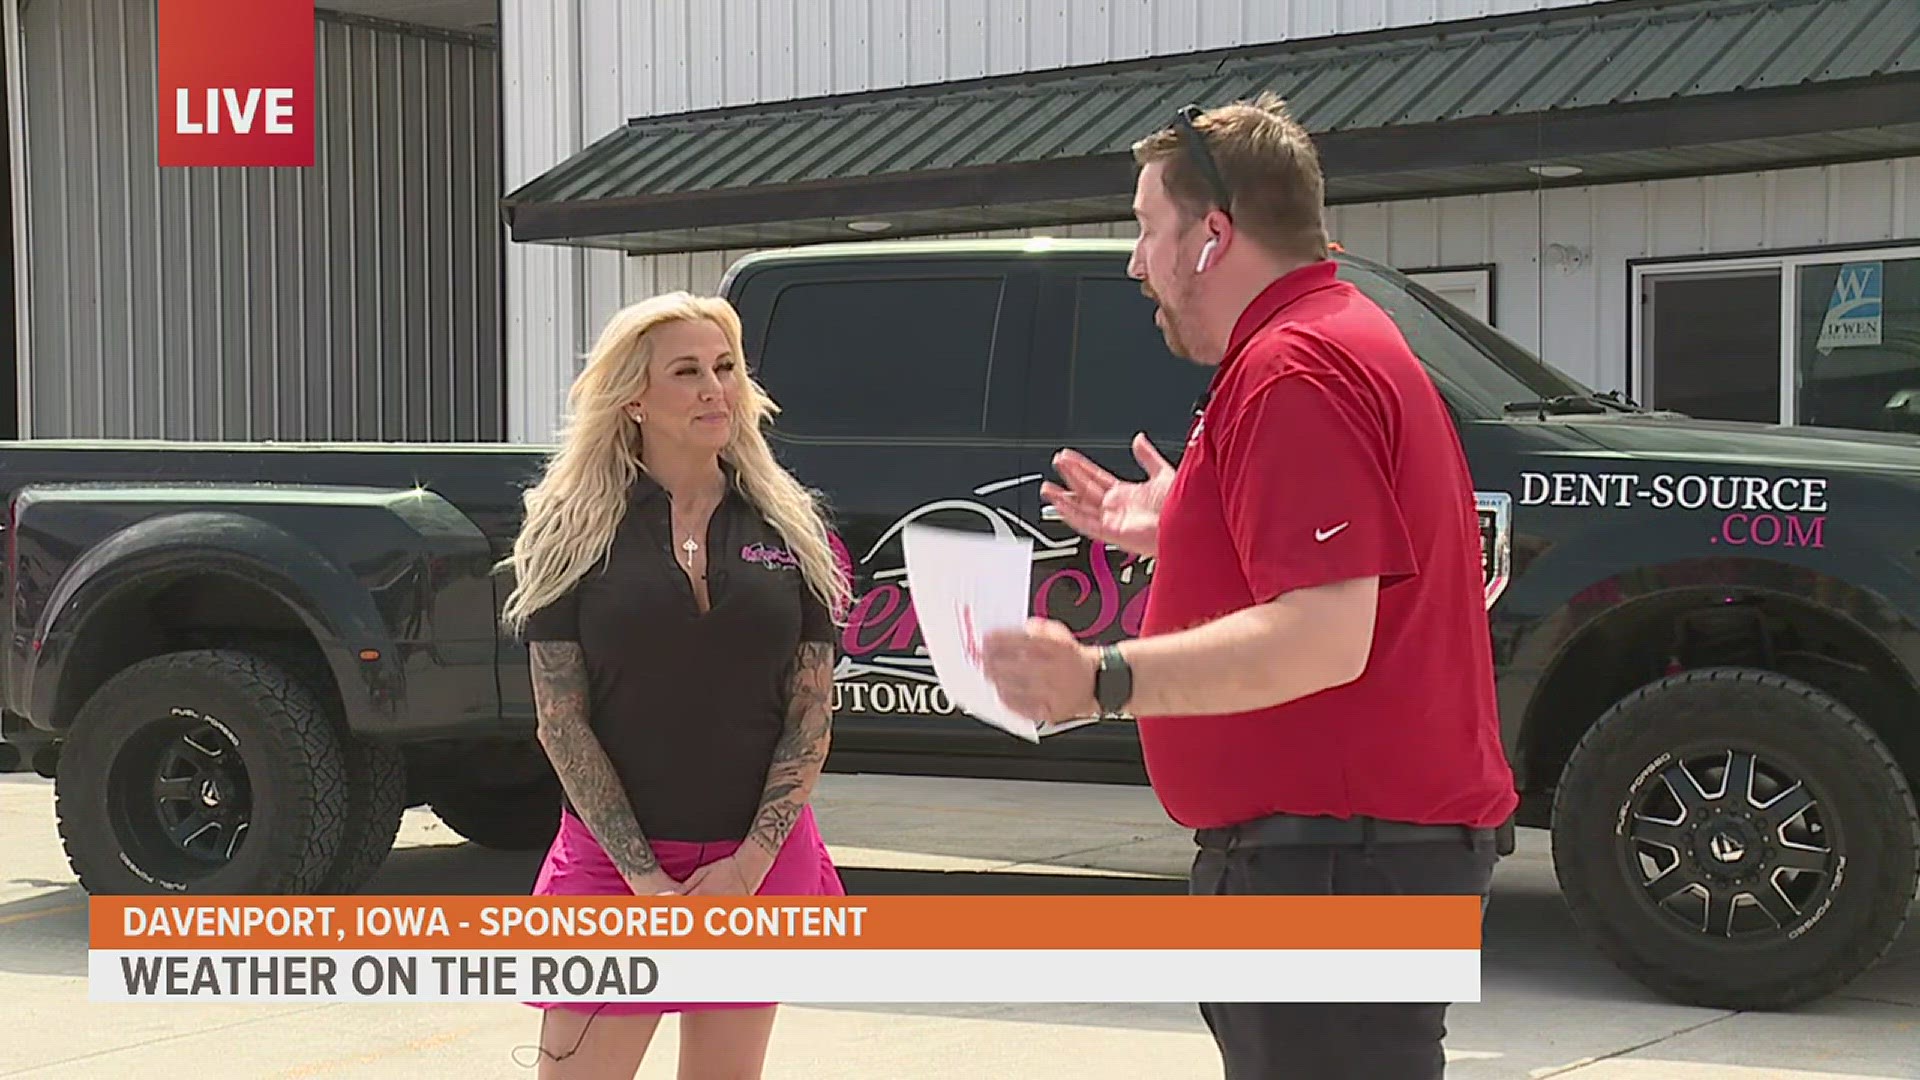 Andrew Stutzke visited Dent Source in Davenport, IA for Weather on the Road.